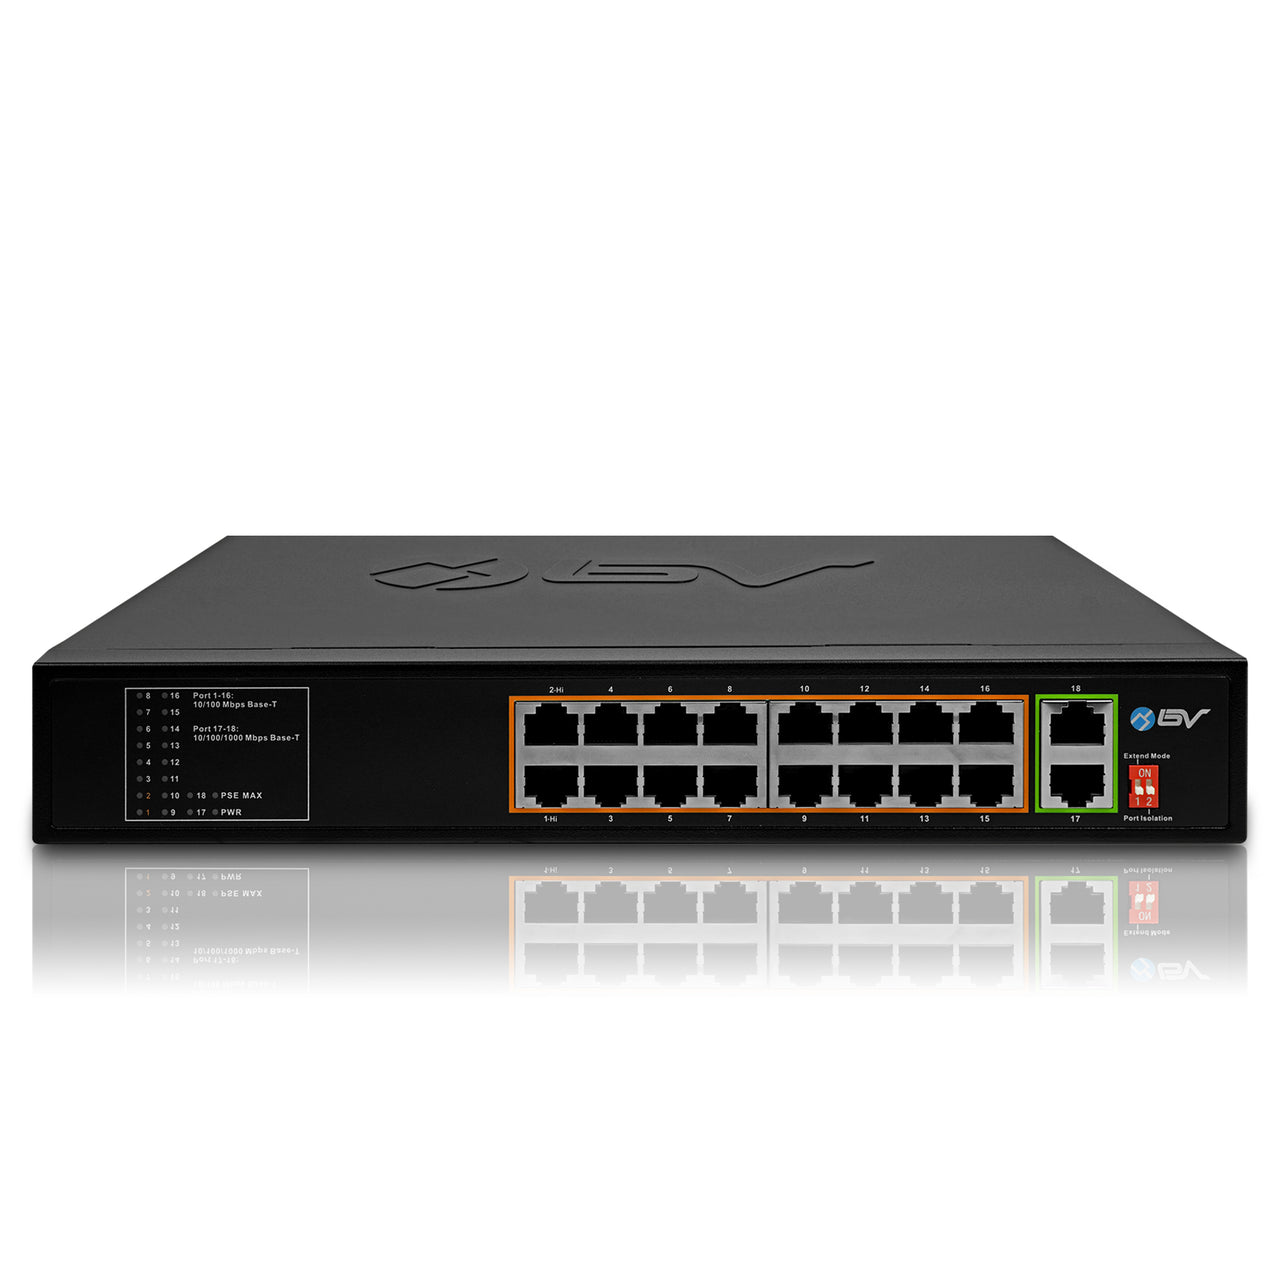 BV-Tech 16 Port PoE Switch Front